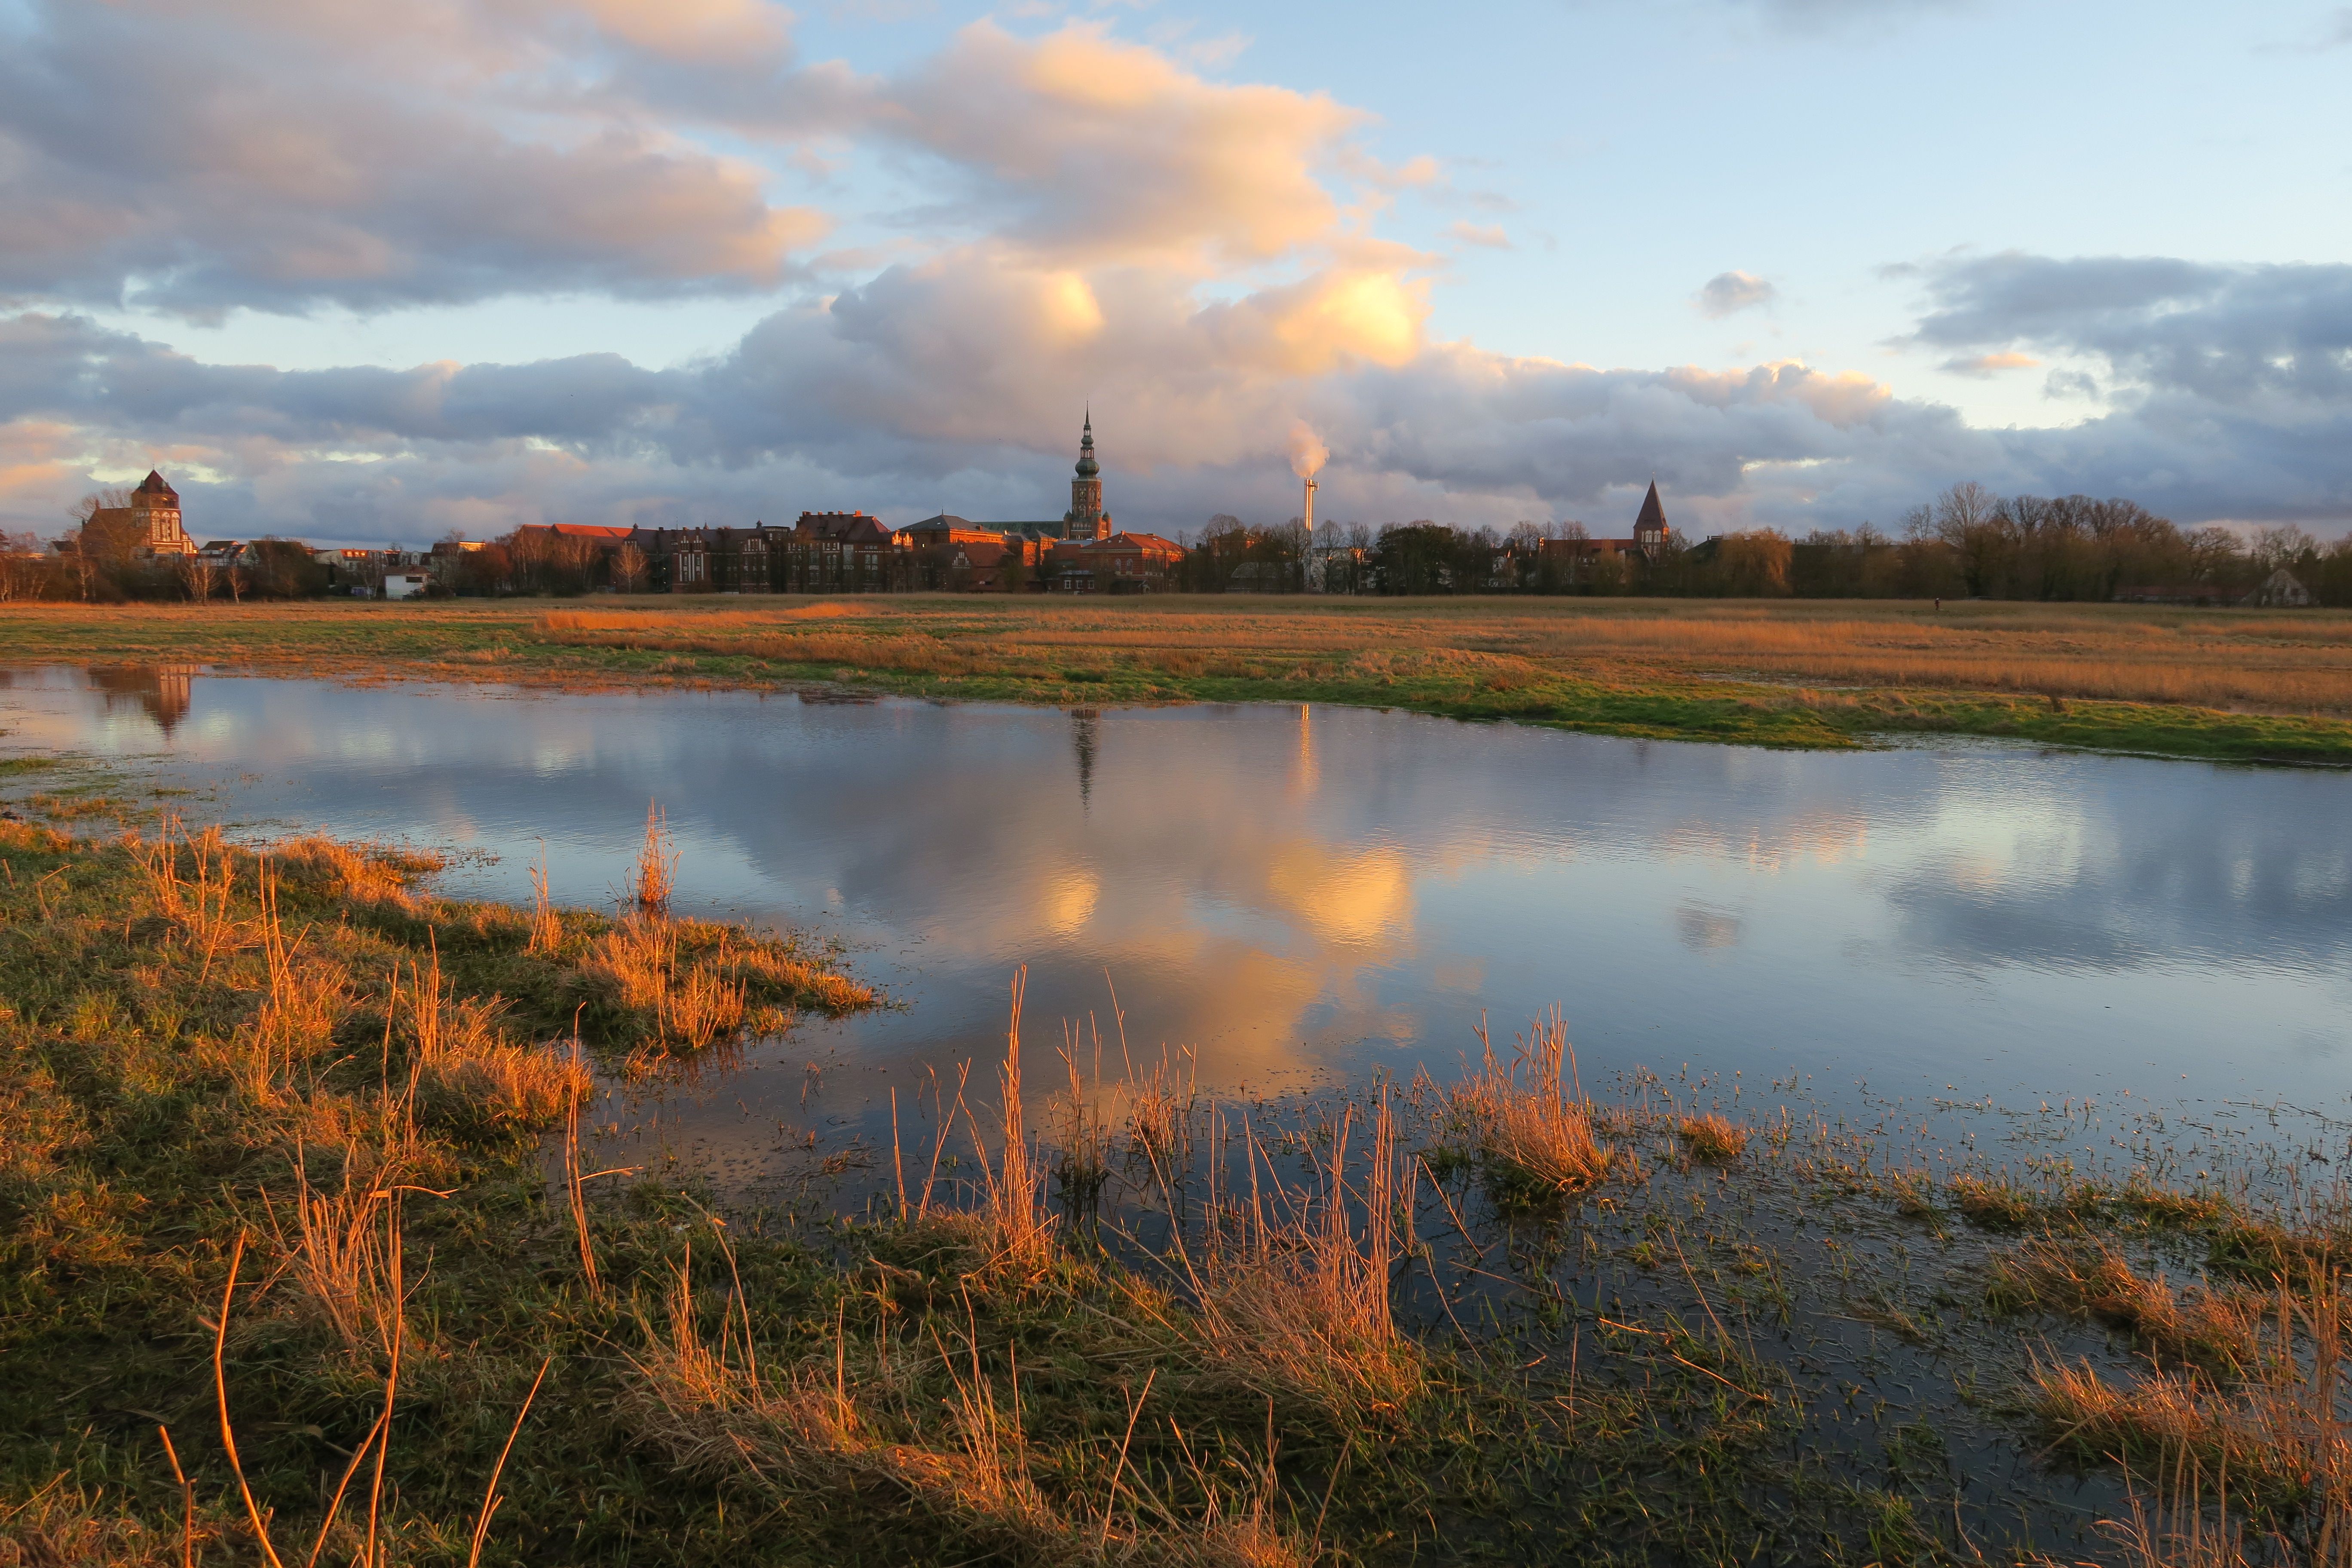 View on peatlands and Greifswald (Photo: Christoph Schalla)